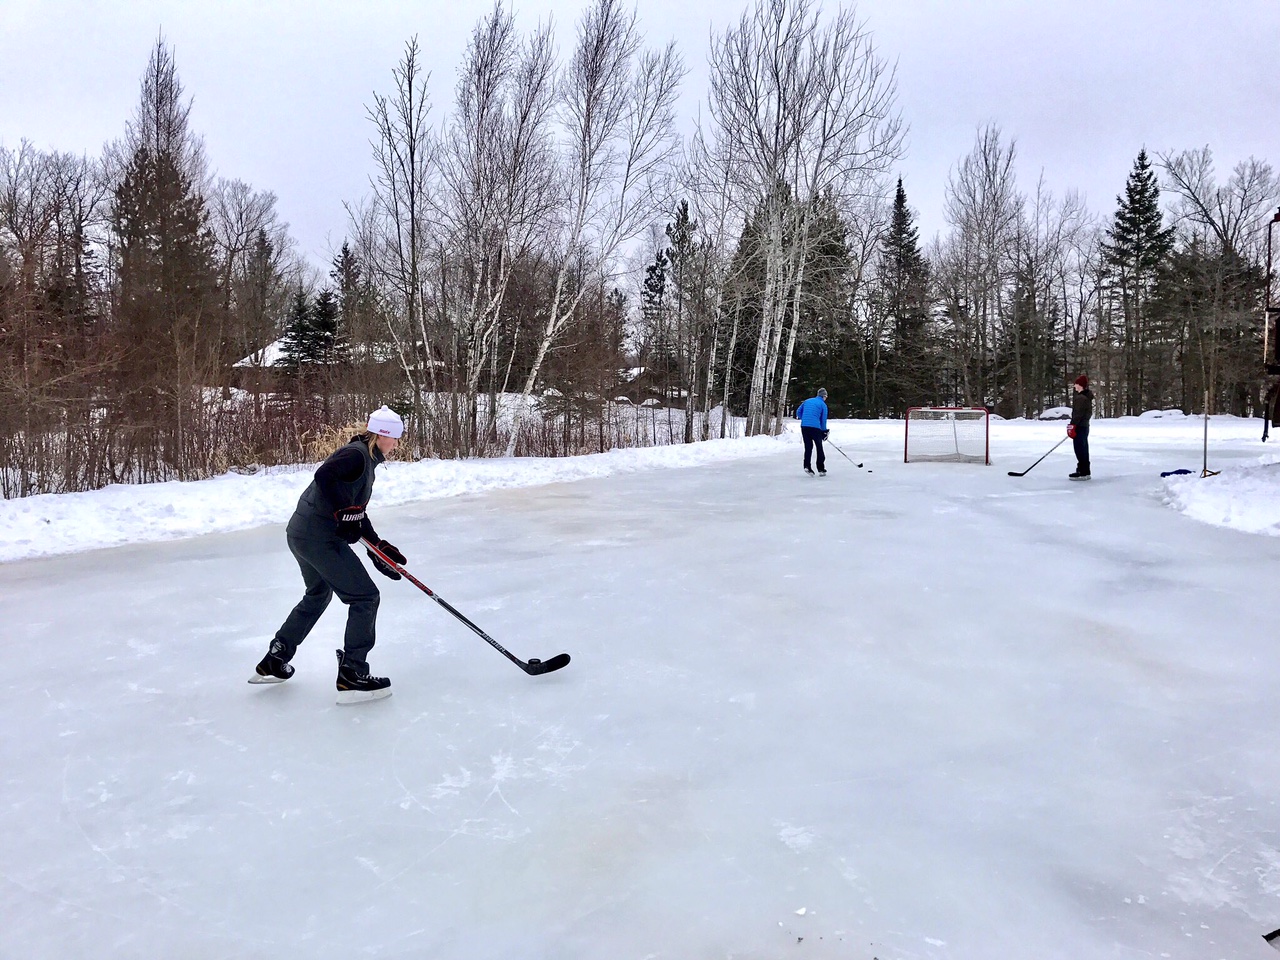 Skating on the rink for the first time this year. The weather this afternoon will require a flooding once it cools down again